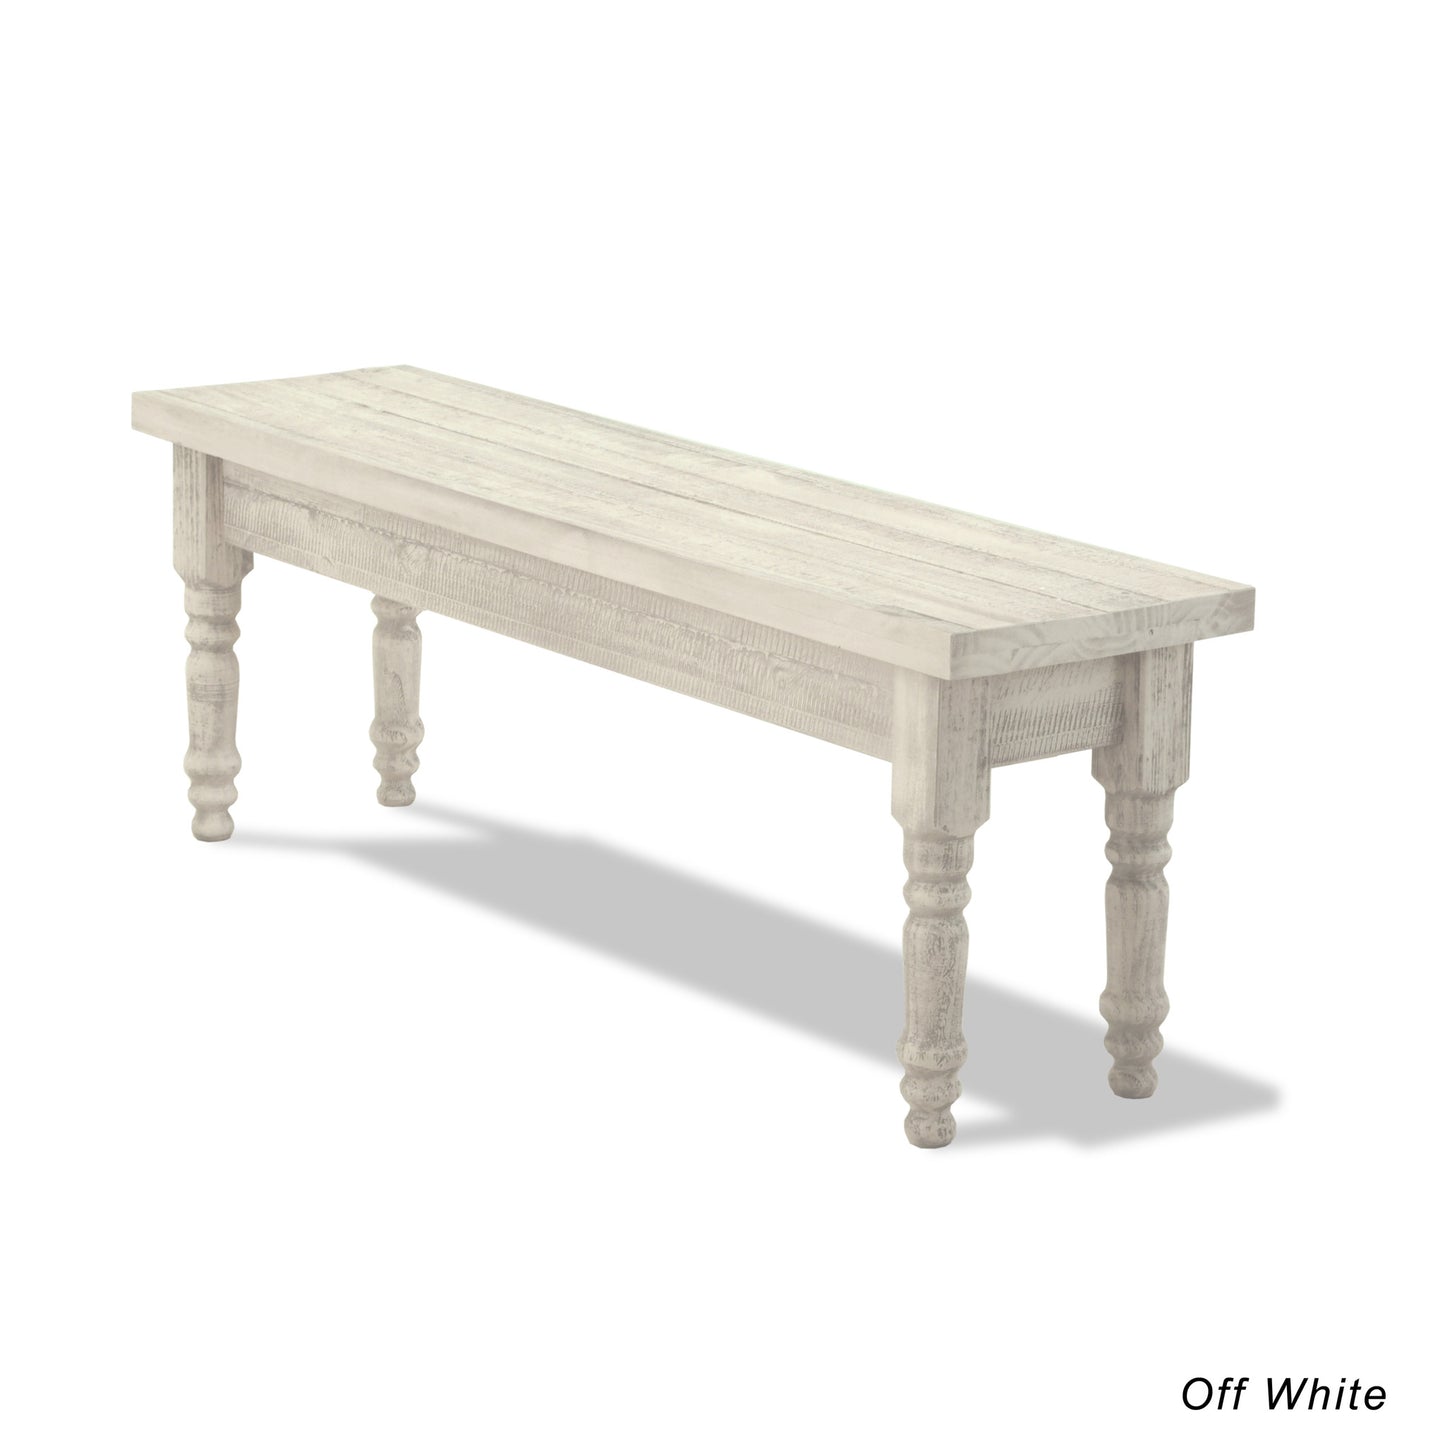 Valerie Solid Wood Bench - Off-White - Grain Wood Furniture - 4